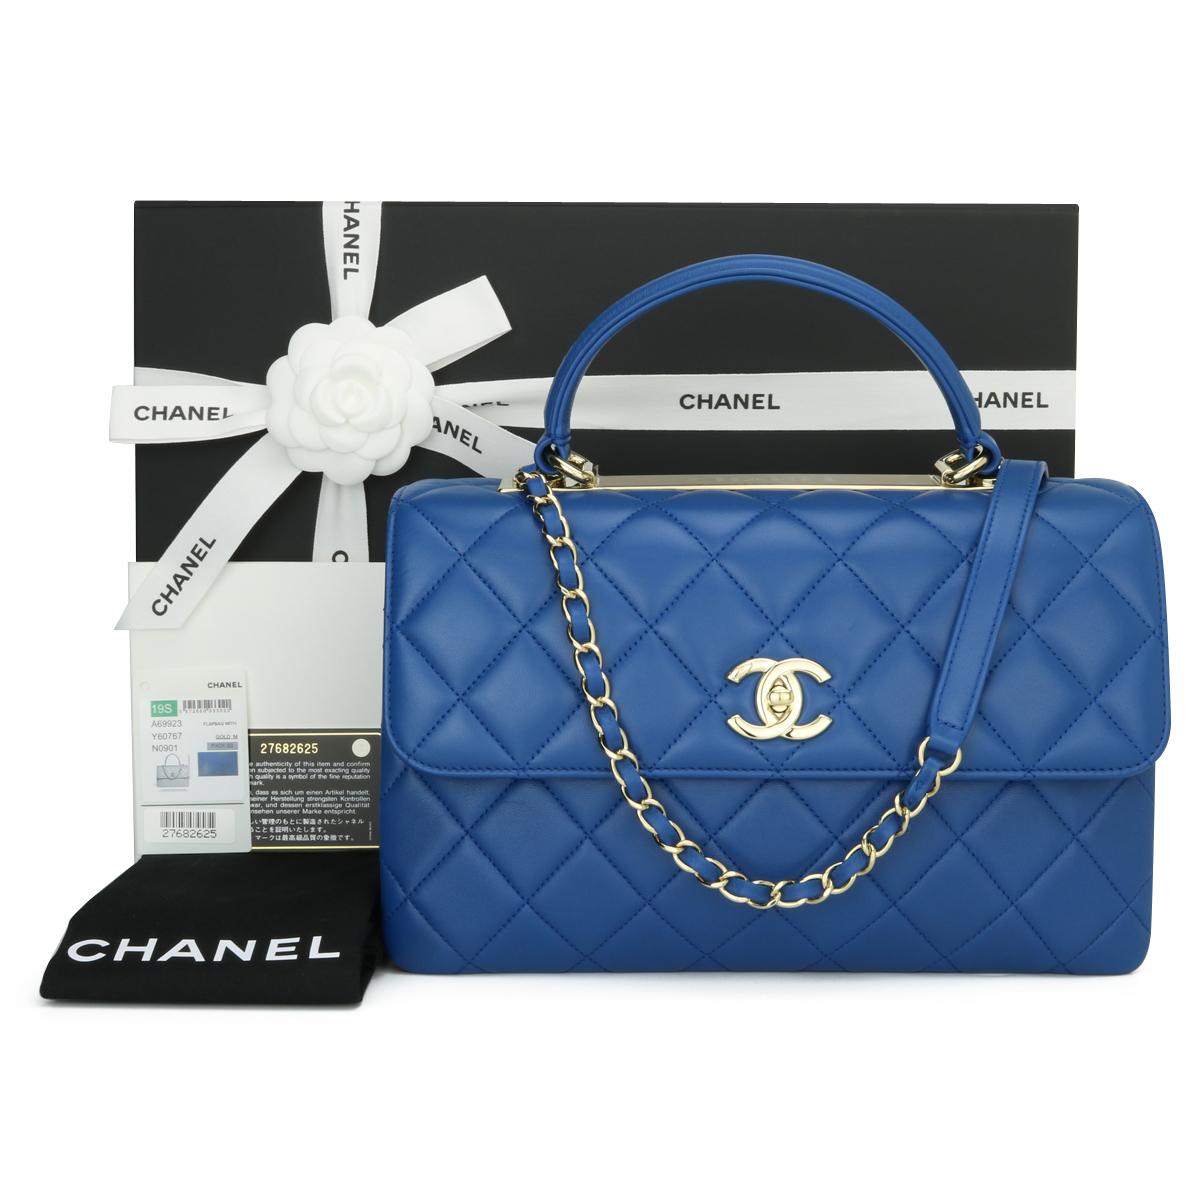 CHANEL Trendy CC Top Handle Bag Medium Blue Quilted Lambskin with Light Gold Hardware 2019.

This stunning bag is in excellent condition, the bag still holds its original shape, and the hardware is still very shiny. The leather smells fresh as if